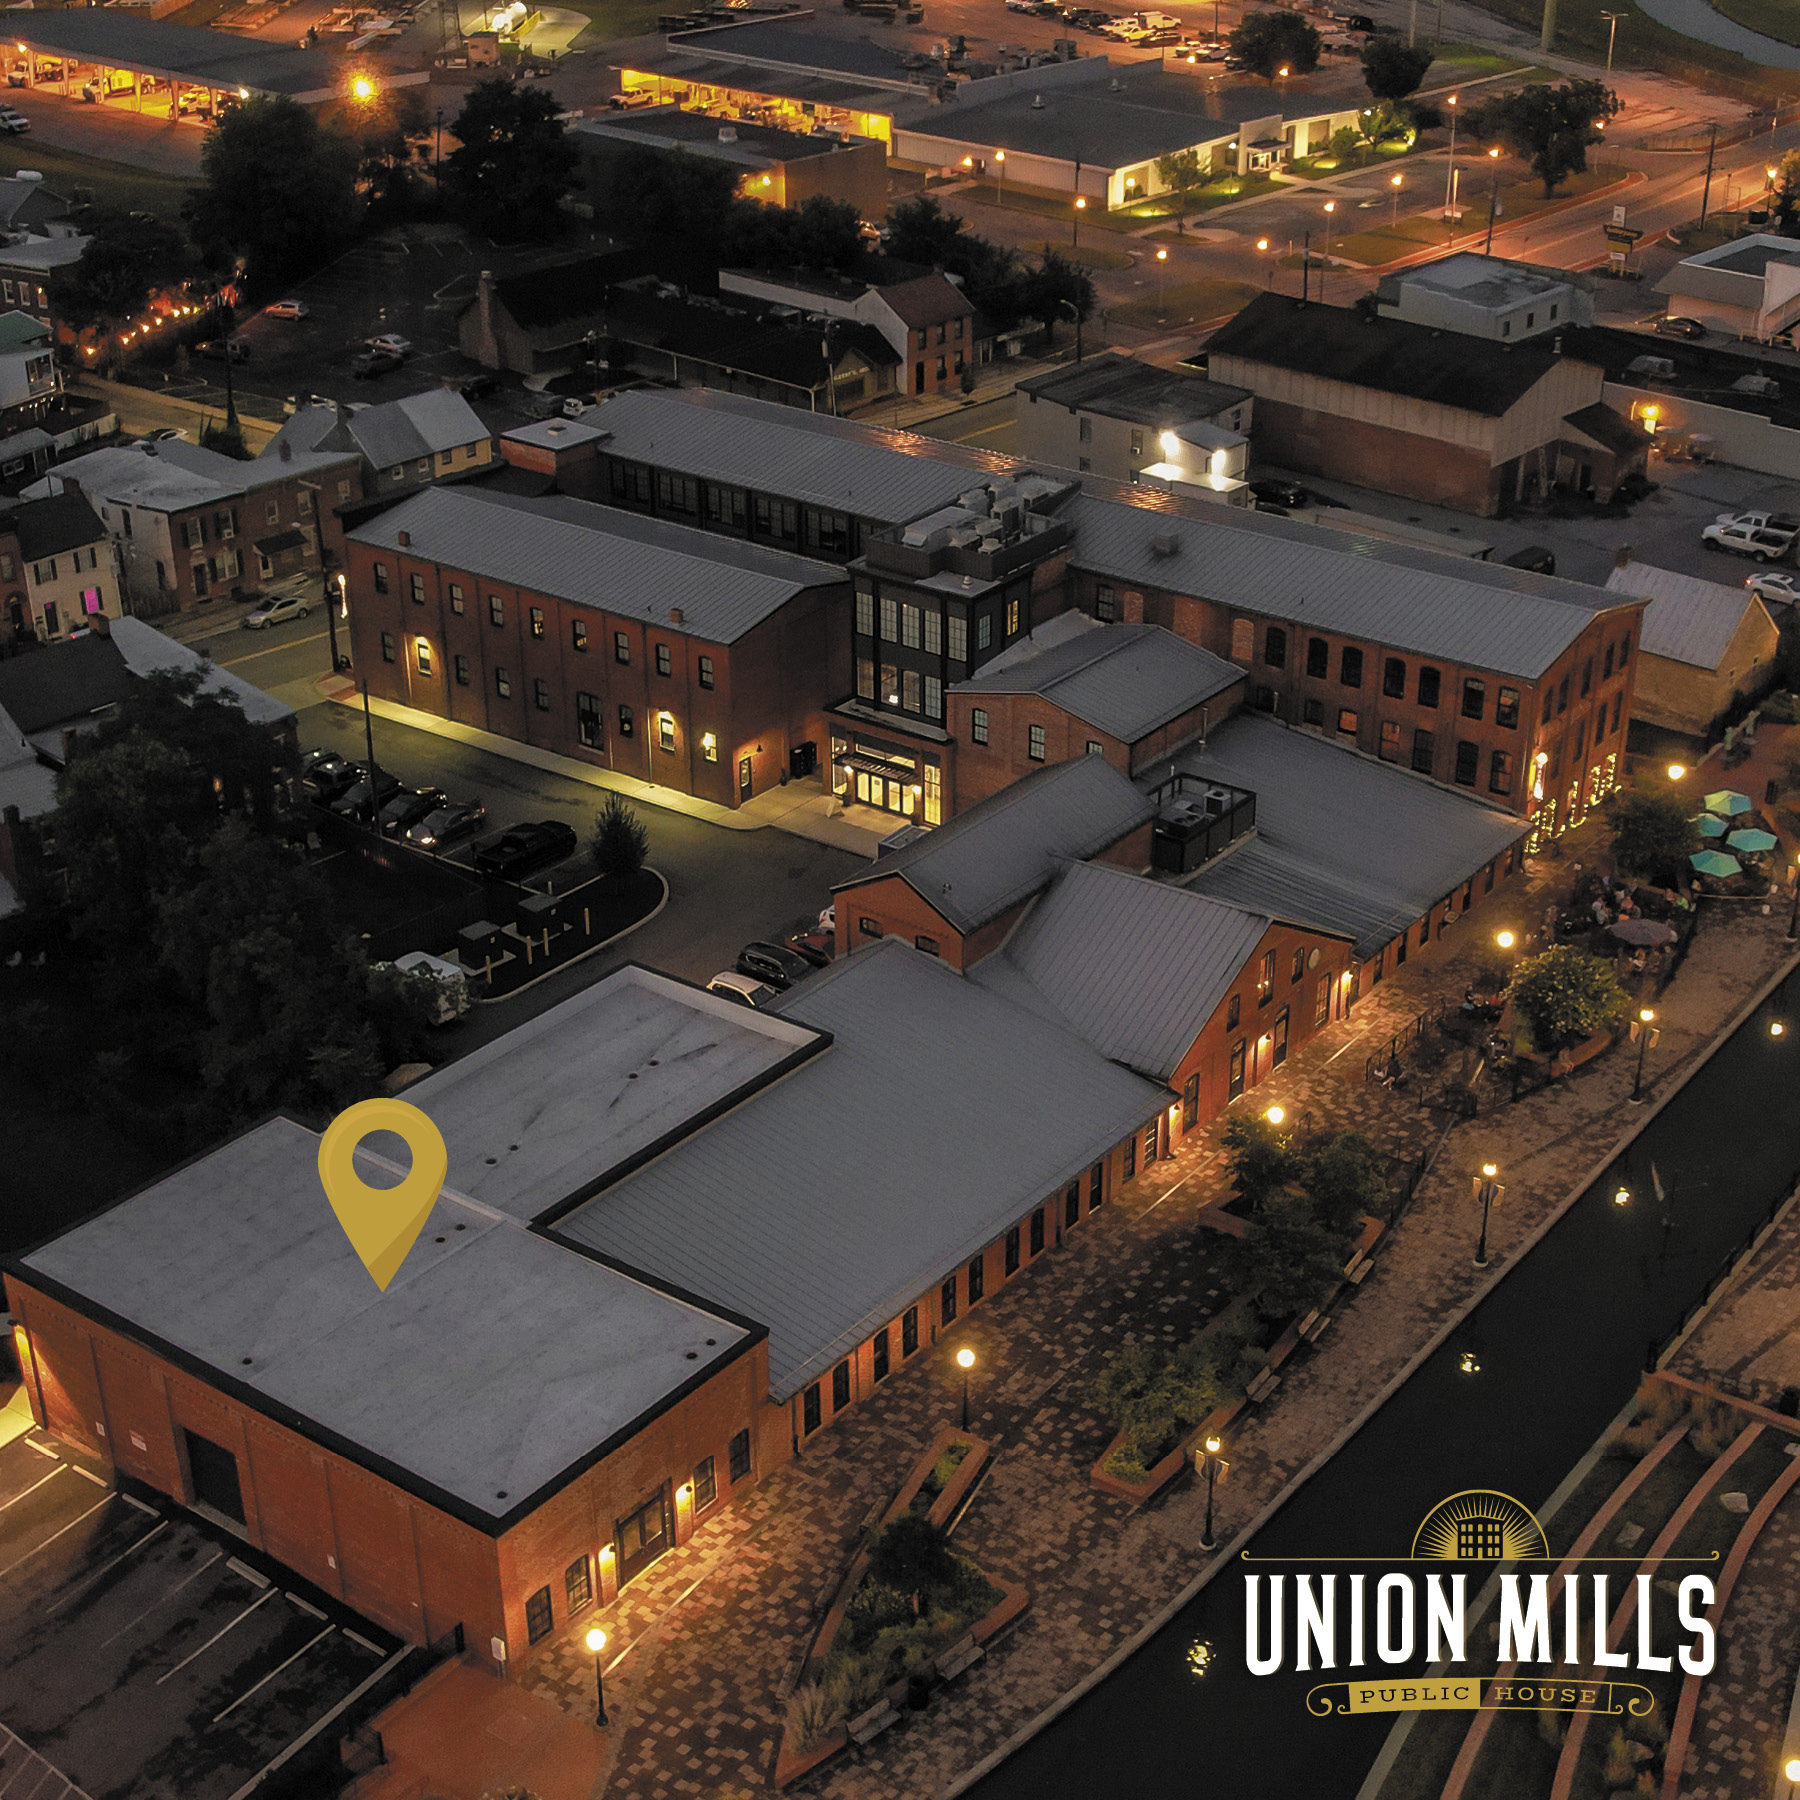 Union Mills Public House on Carroll Creek Aerial View